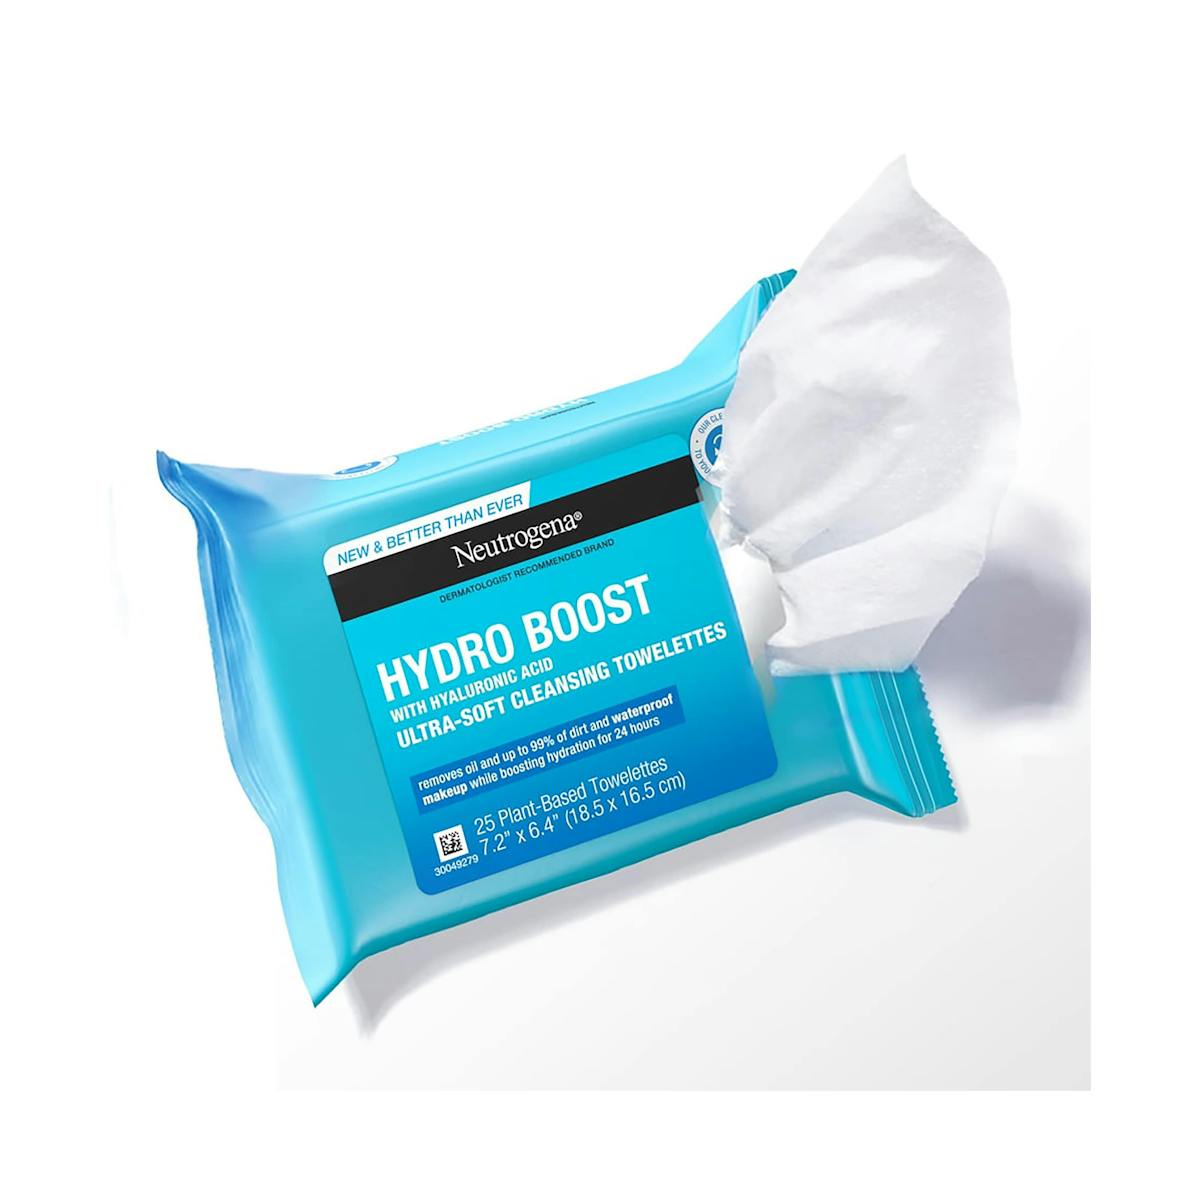 Compostable Hydro Boost Makeup Wipes with Hyaluronic Acid